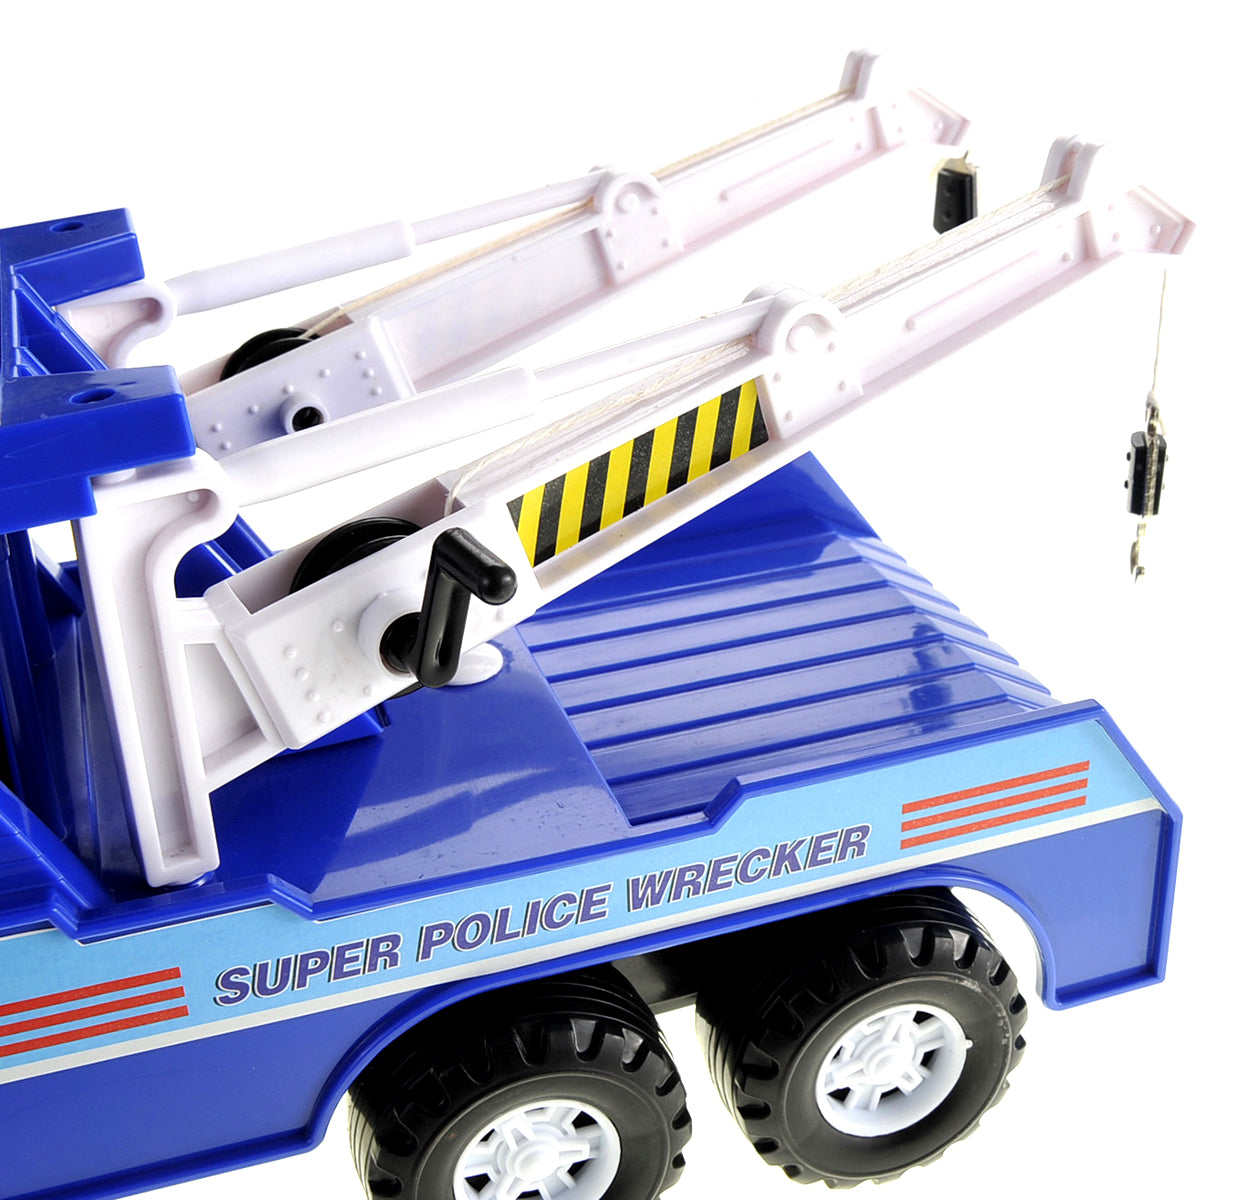 Big Heavy Duty Wrecker Tow Truck Police Toy for Kids with Friction Pow